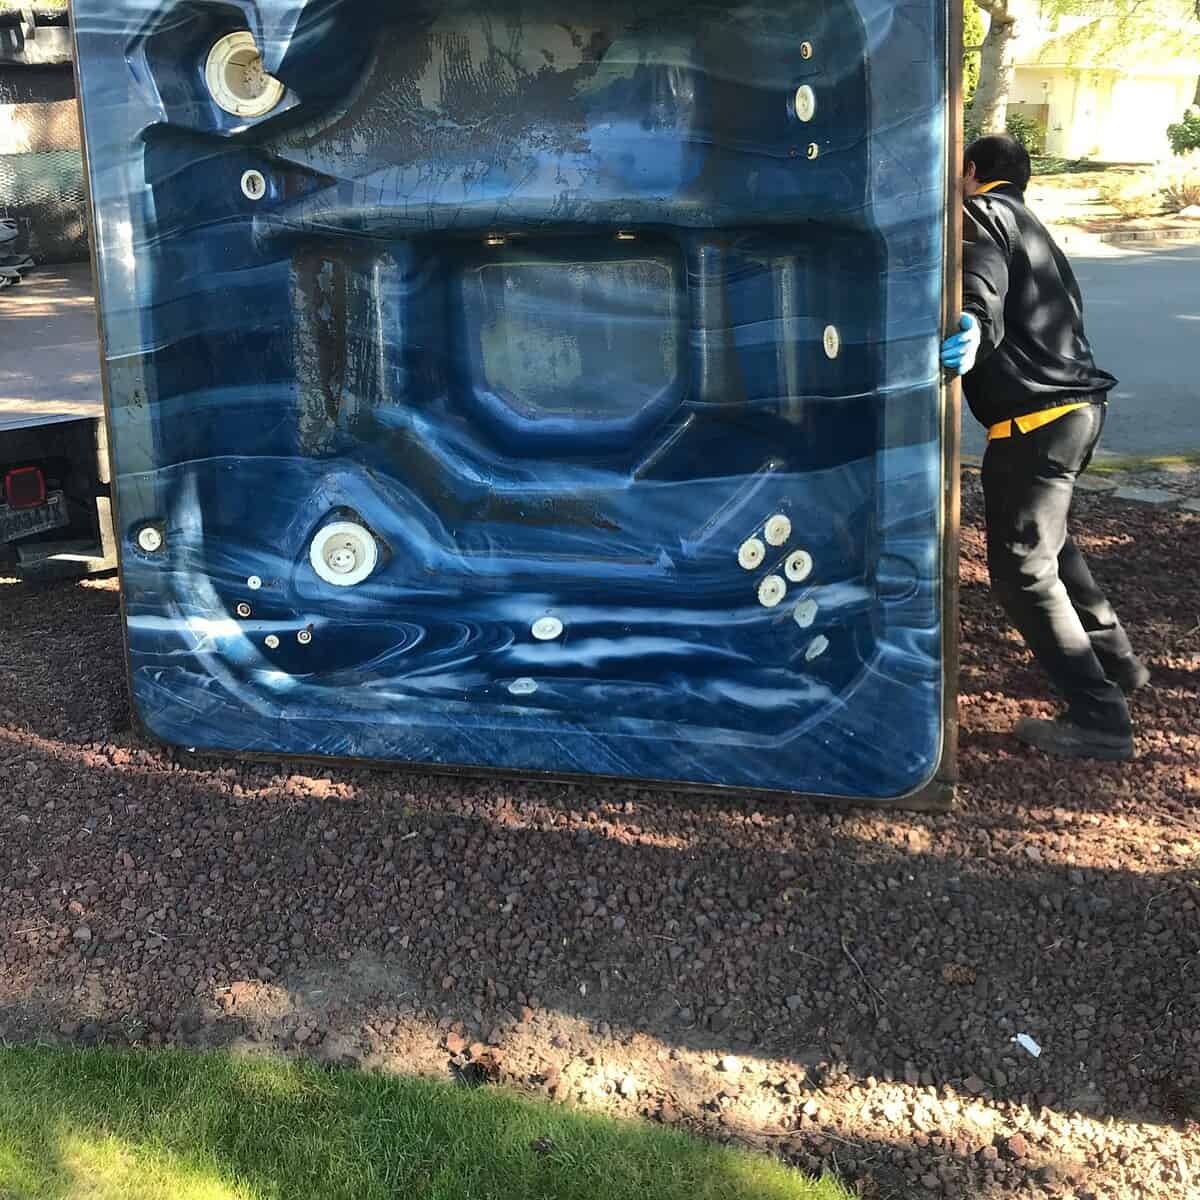 junk b gone jacuzzi hot tub removal seattle